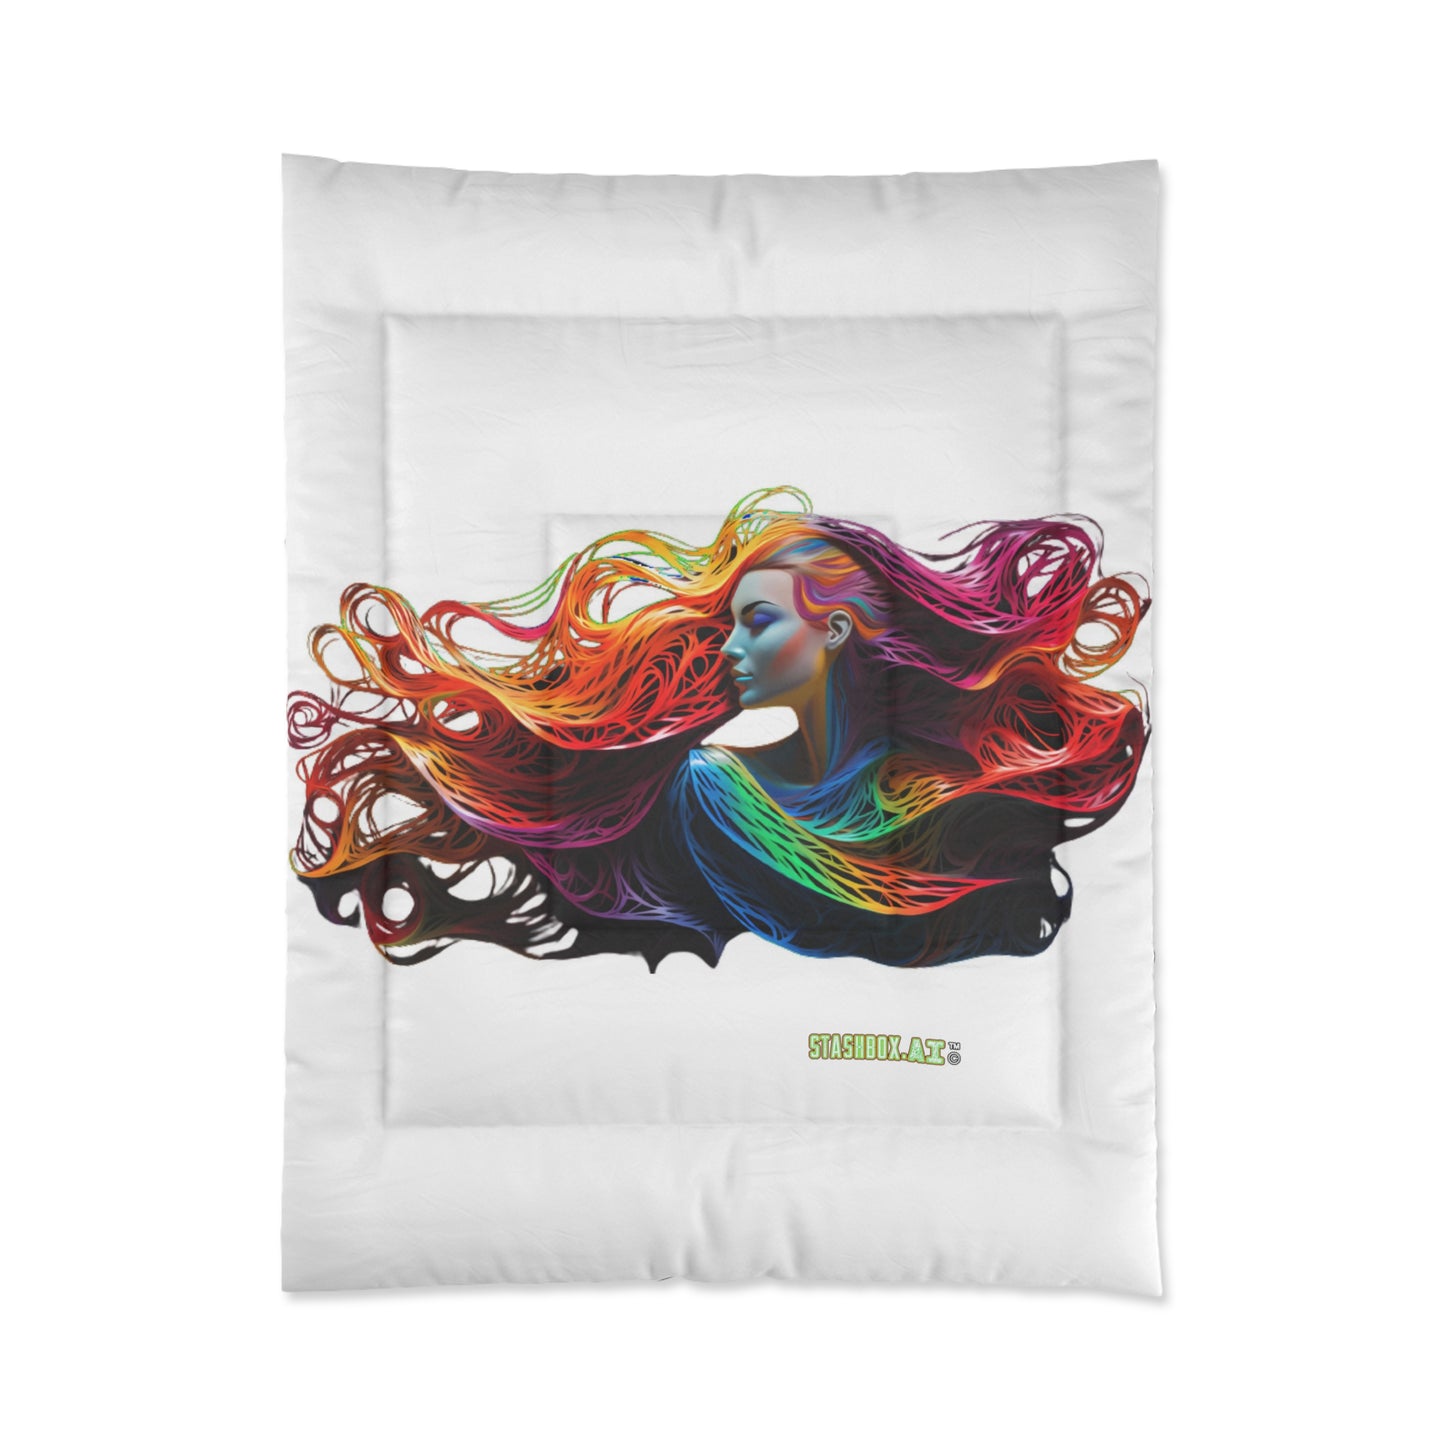 Bedding Comforter Beautiful Models Drawn with Rainbow Ink #015